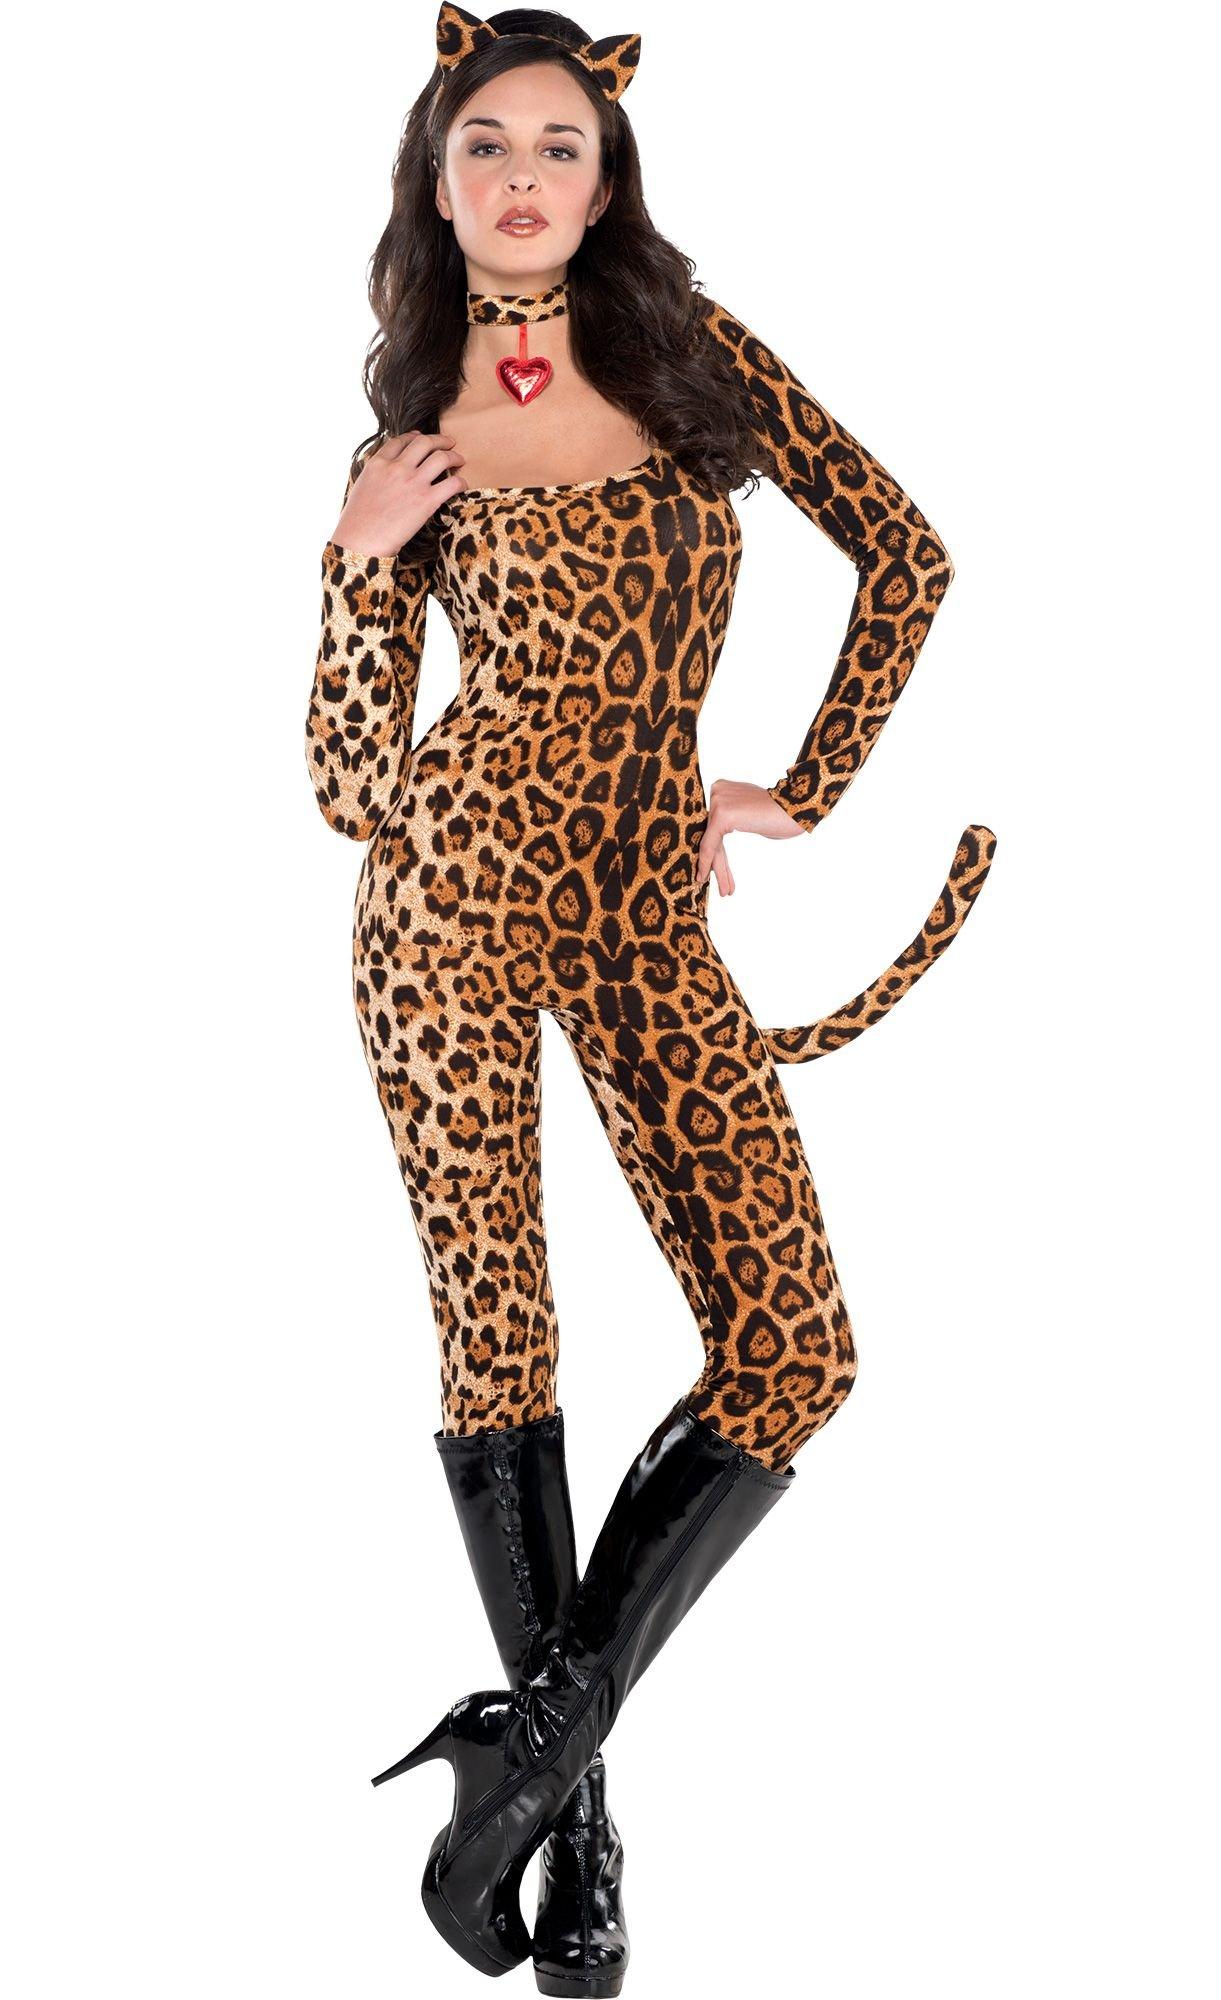 Leopard Catsuit Costume For Women Party City